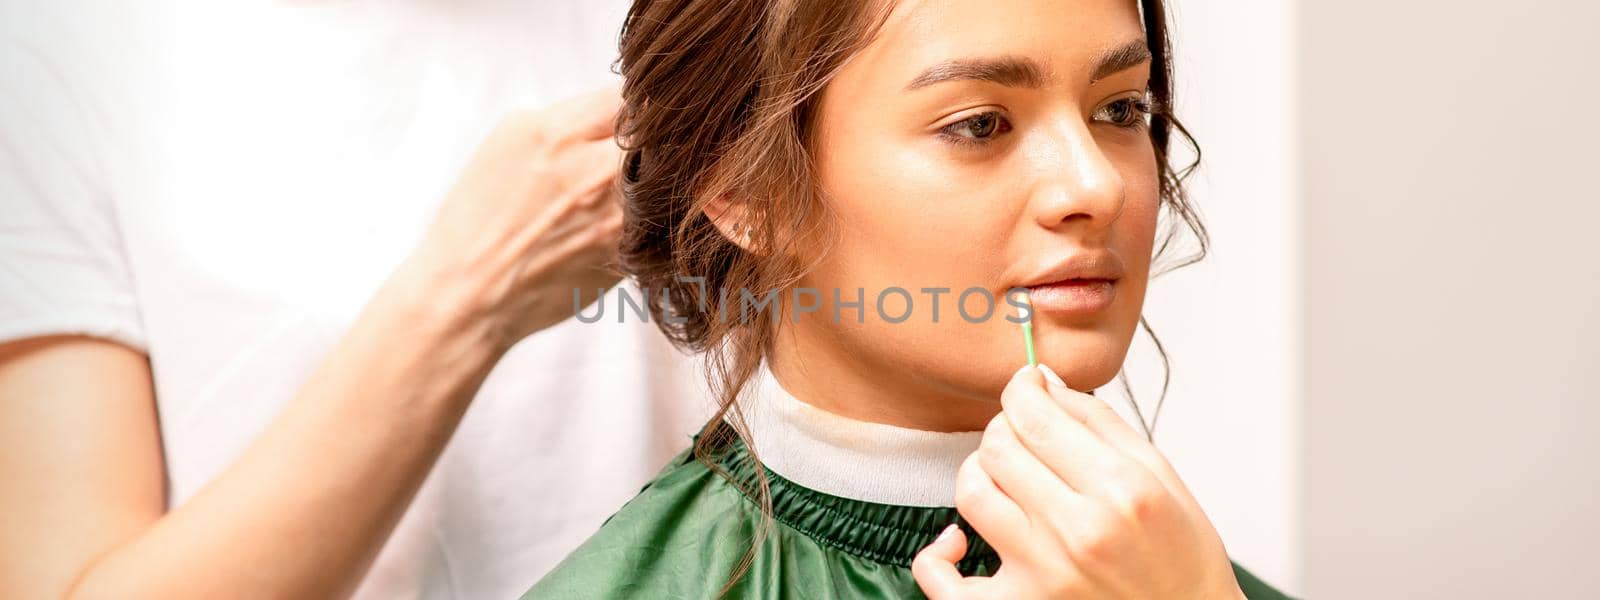 Makeup artist and hairdresser prepare the bride making hairstyle and makeup in a beauty salon. by okskukuruza